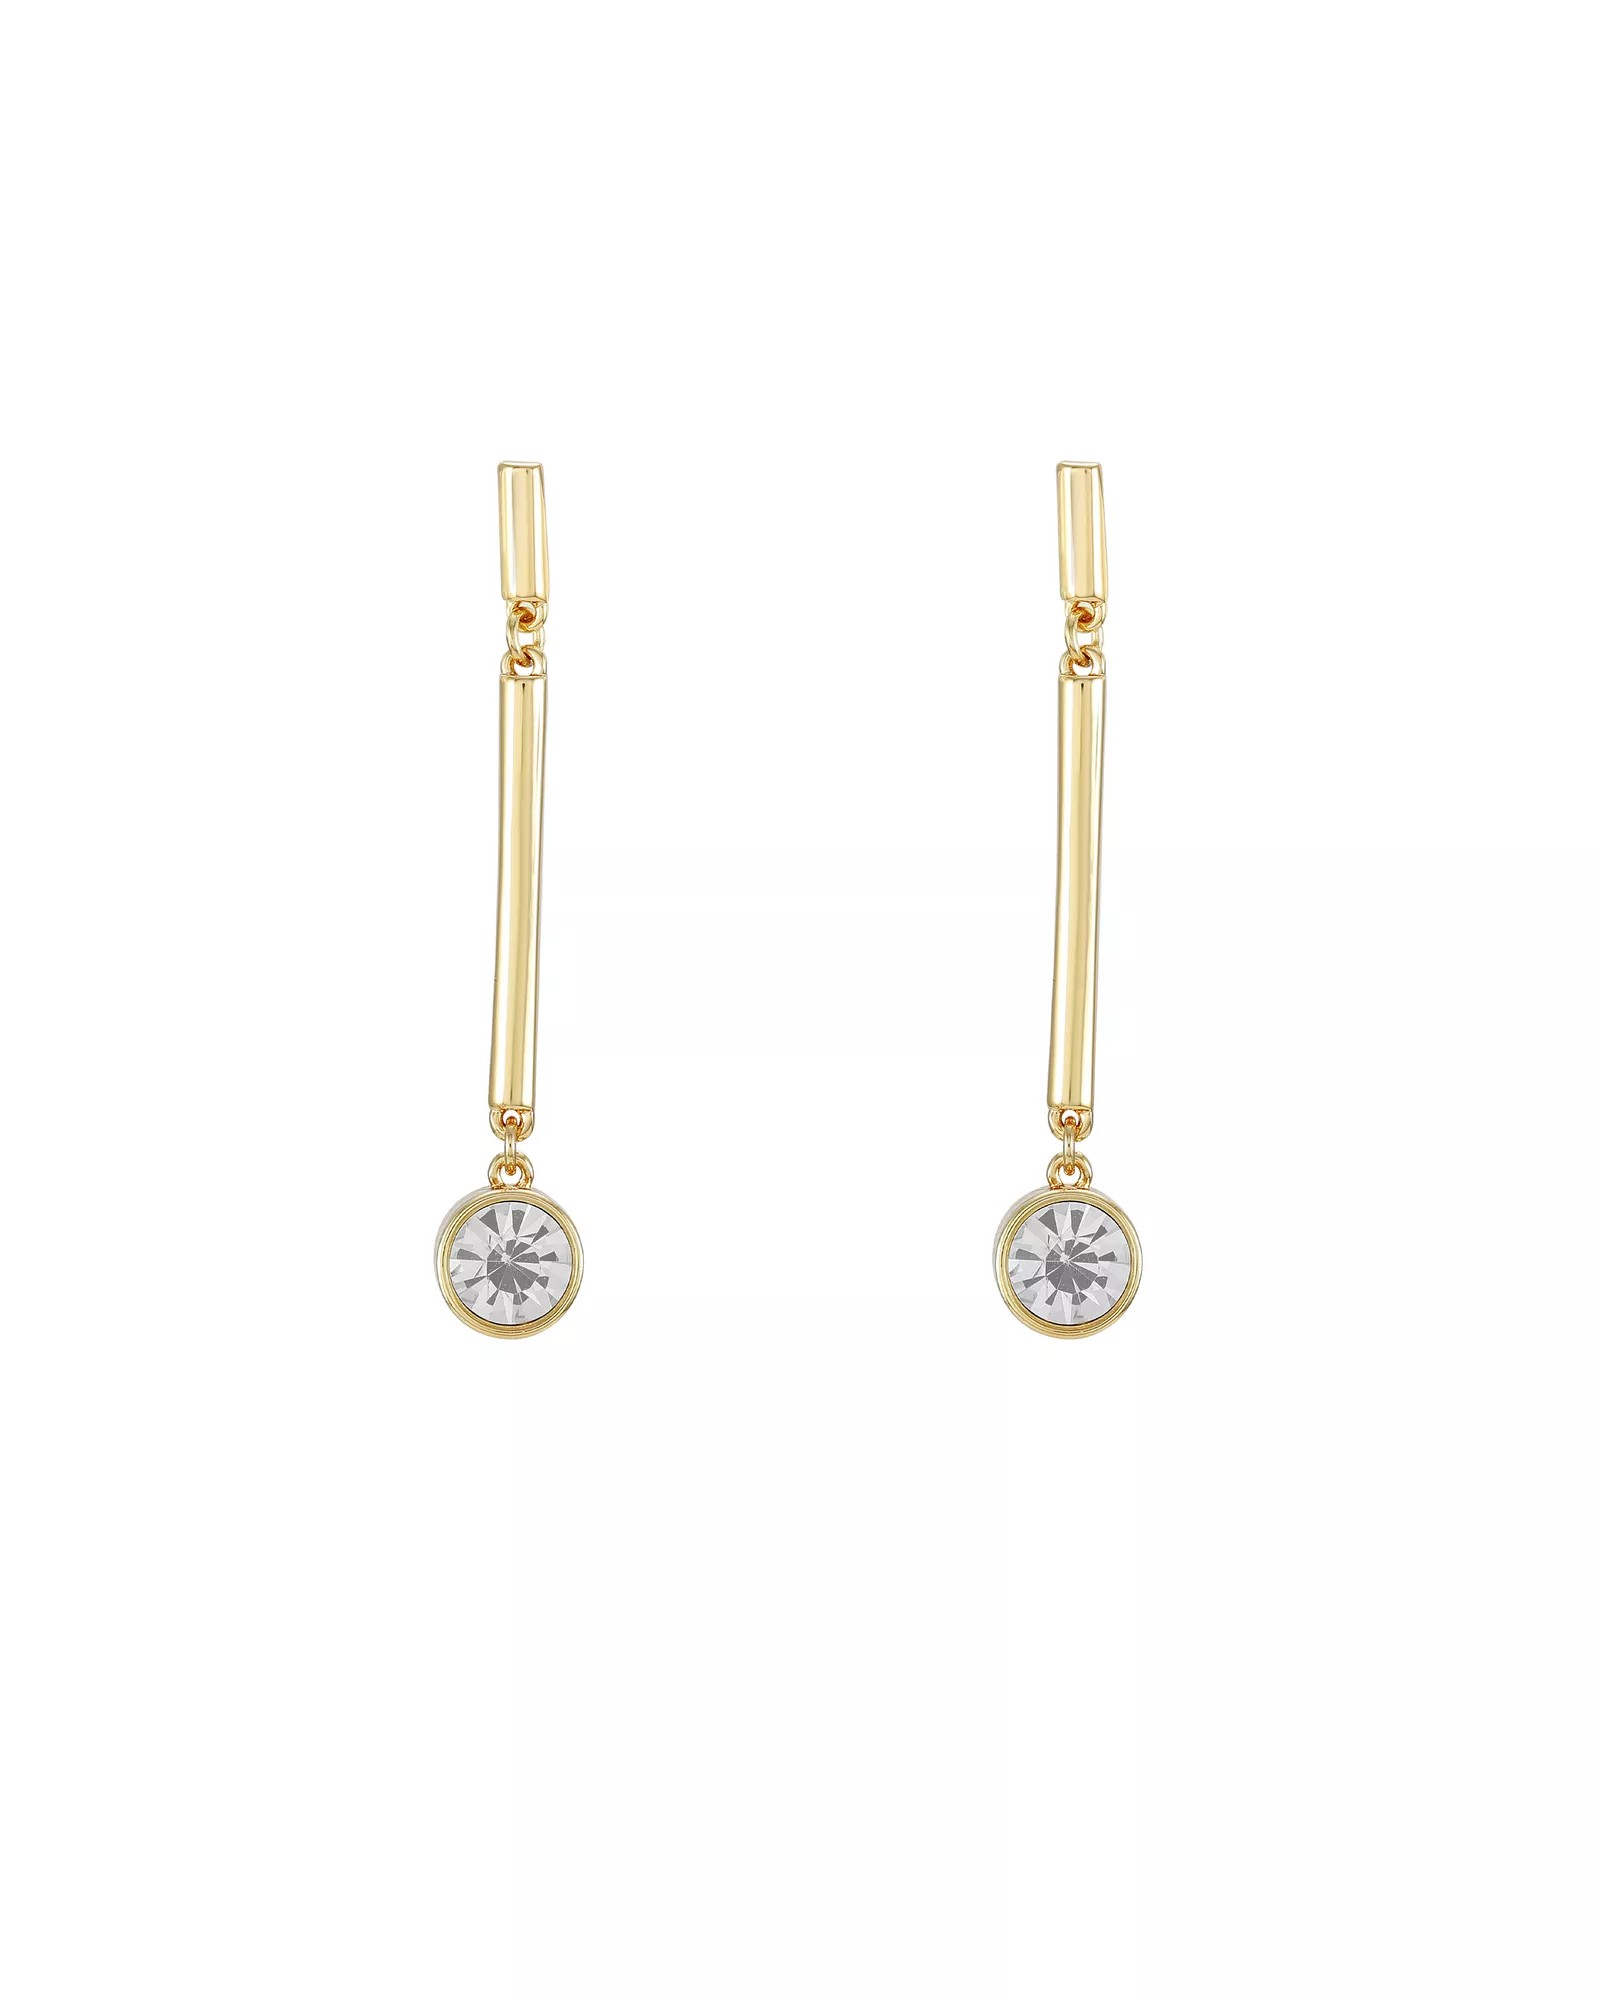 Vince Camuto Jeweled Linear-bar Drop Earrings | Vince Camuto